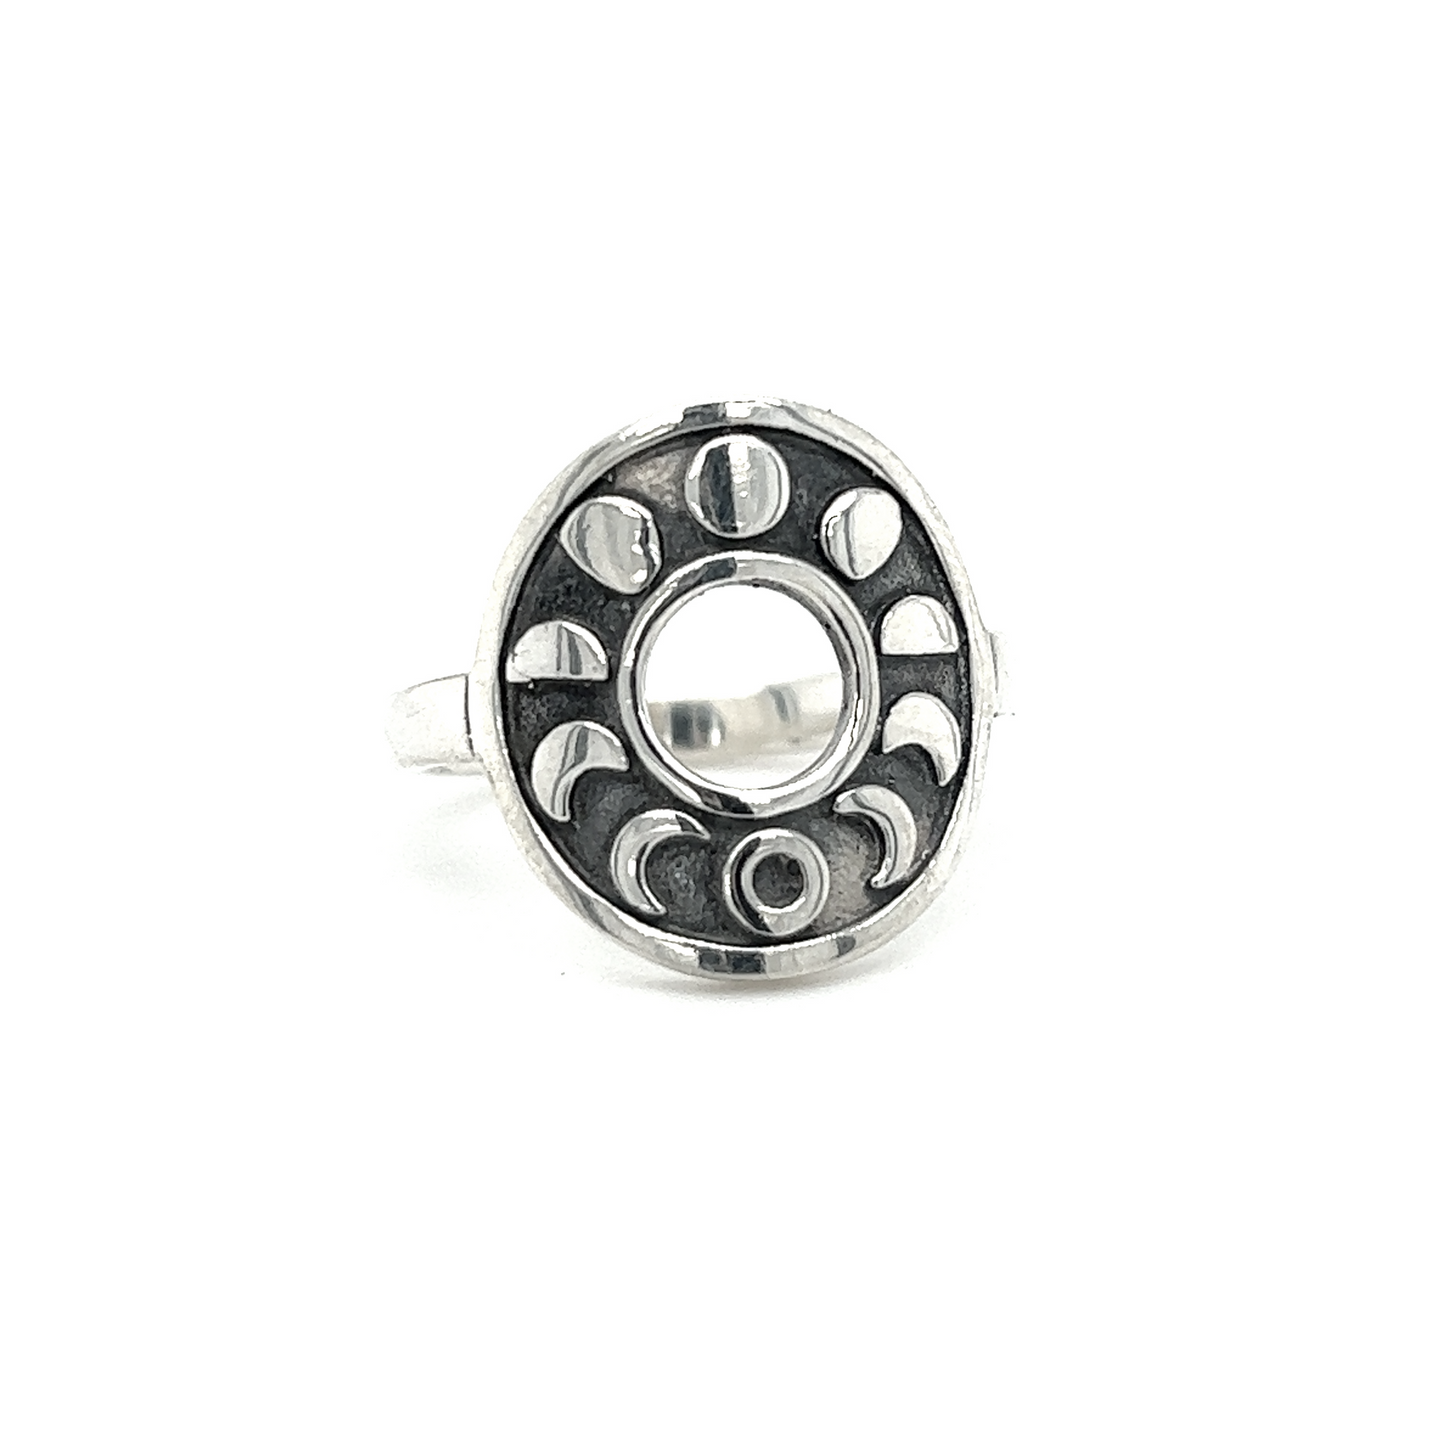 A Super Silver Striking Circular Moon Phases Ring with mystical energy.